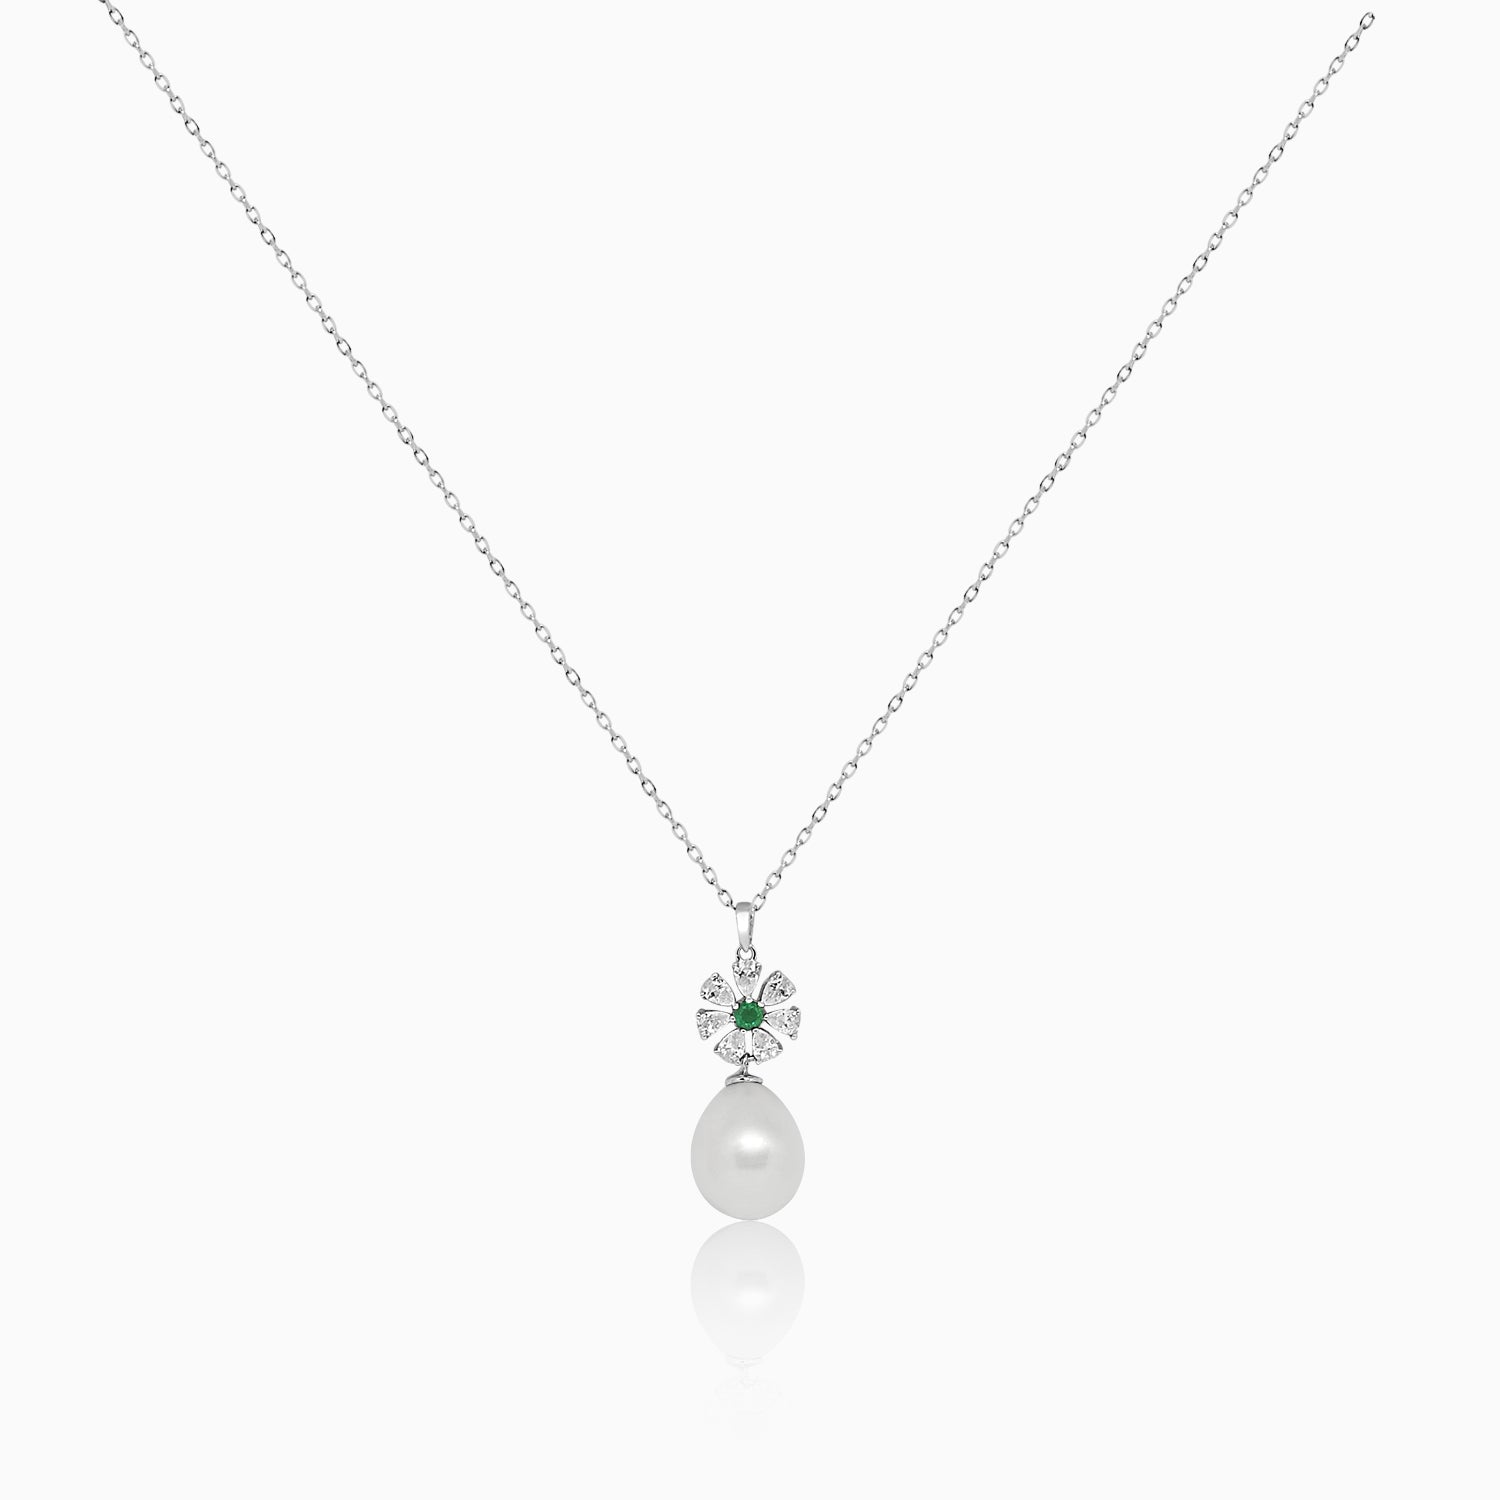 Silver Dangling Emerald and Pearl Flower Necklace